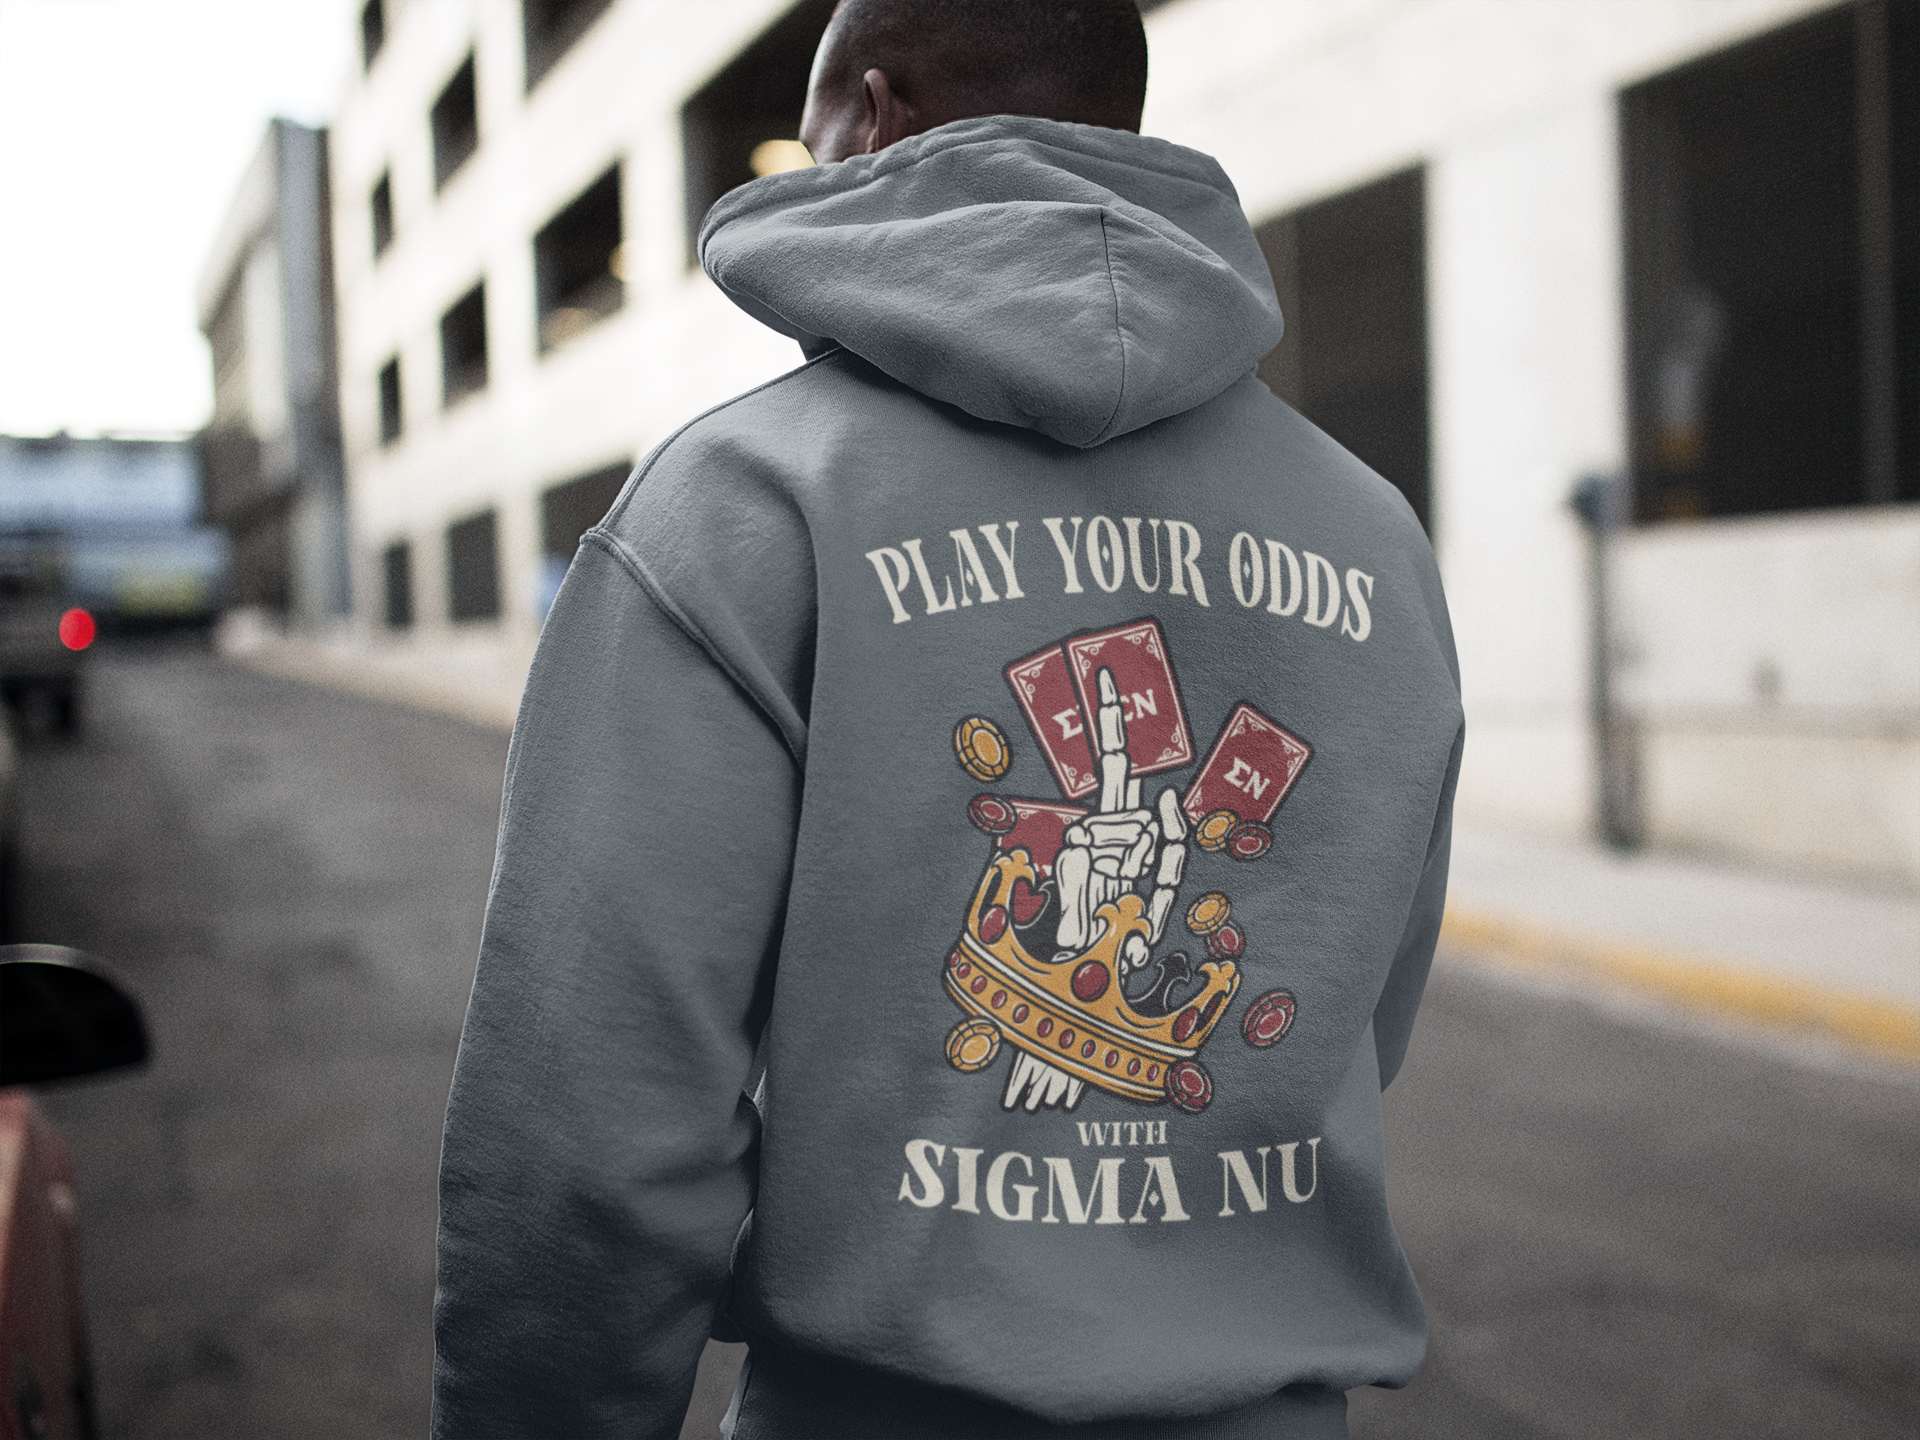 Sigma Nu Graphic Hoodie | Play Your Odds | Sigma Nu Clothing, Apparel and Merchandise back model 